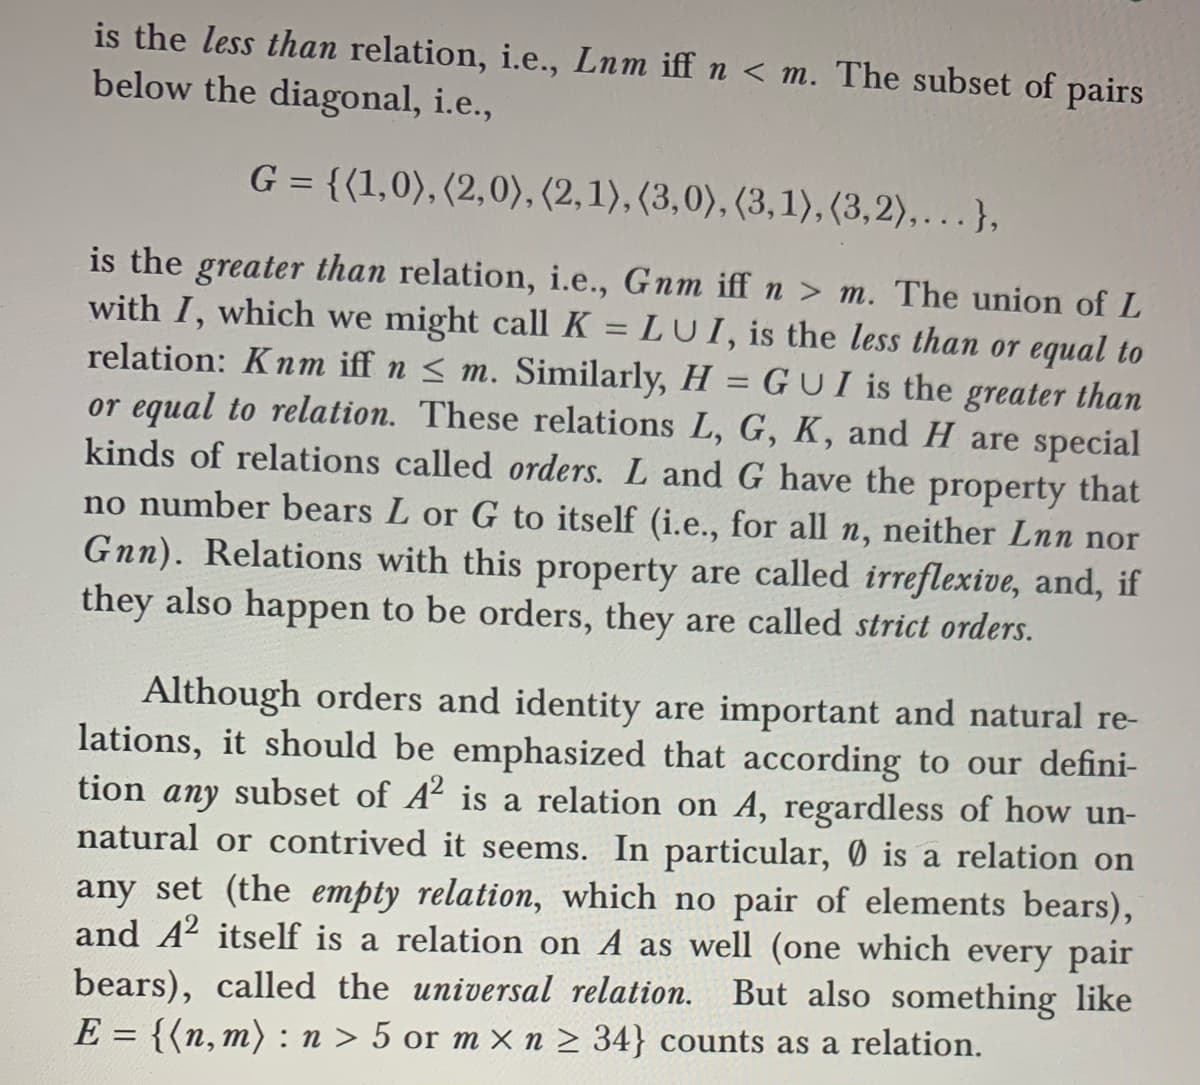 is the less than relation, i.e., Lnm iff n < m. The subset of pairs
below the diagonal, i.e.,
G = {(1,0), (2,0), (2, 1), (3,0), (3,1), (3,2),.},
is the greater than relation, i.e., Gnm iffn > m. The union of L
with I, which we might call K = LUI, is the less than or equal to
relation: Knm iff n < m. Similarly, H = G U I is the greater than
or equal to relation. These relations L, G, K, and H are special
kinds of relations called orders. L and G have the property that
no number bears L or G to itself (i.e., for all n, neither Lnn nor
Gnn). Relations with this property are called irreflexive, and, if
they also happen to be orders, they are called strict orders.
Although orders and identity are important and natural re-
lations, it should be emphasized that according to our defini-
tion any subset of A² is a relation on A, regardless of how un-
natural or contrived it seems. In particular, 0 is a relation on
any set (the empty relation, which no pair of elements bears),
and A2 itself is a relation on A as well (one which every pair
bears), called the universal relation. But also something like
E = {(n, m) : n > 5 or m x n > 34} counts as a relation.
